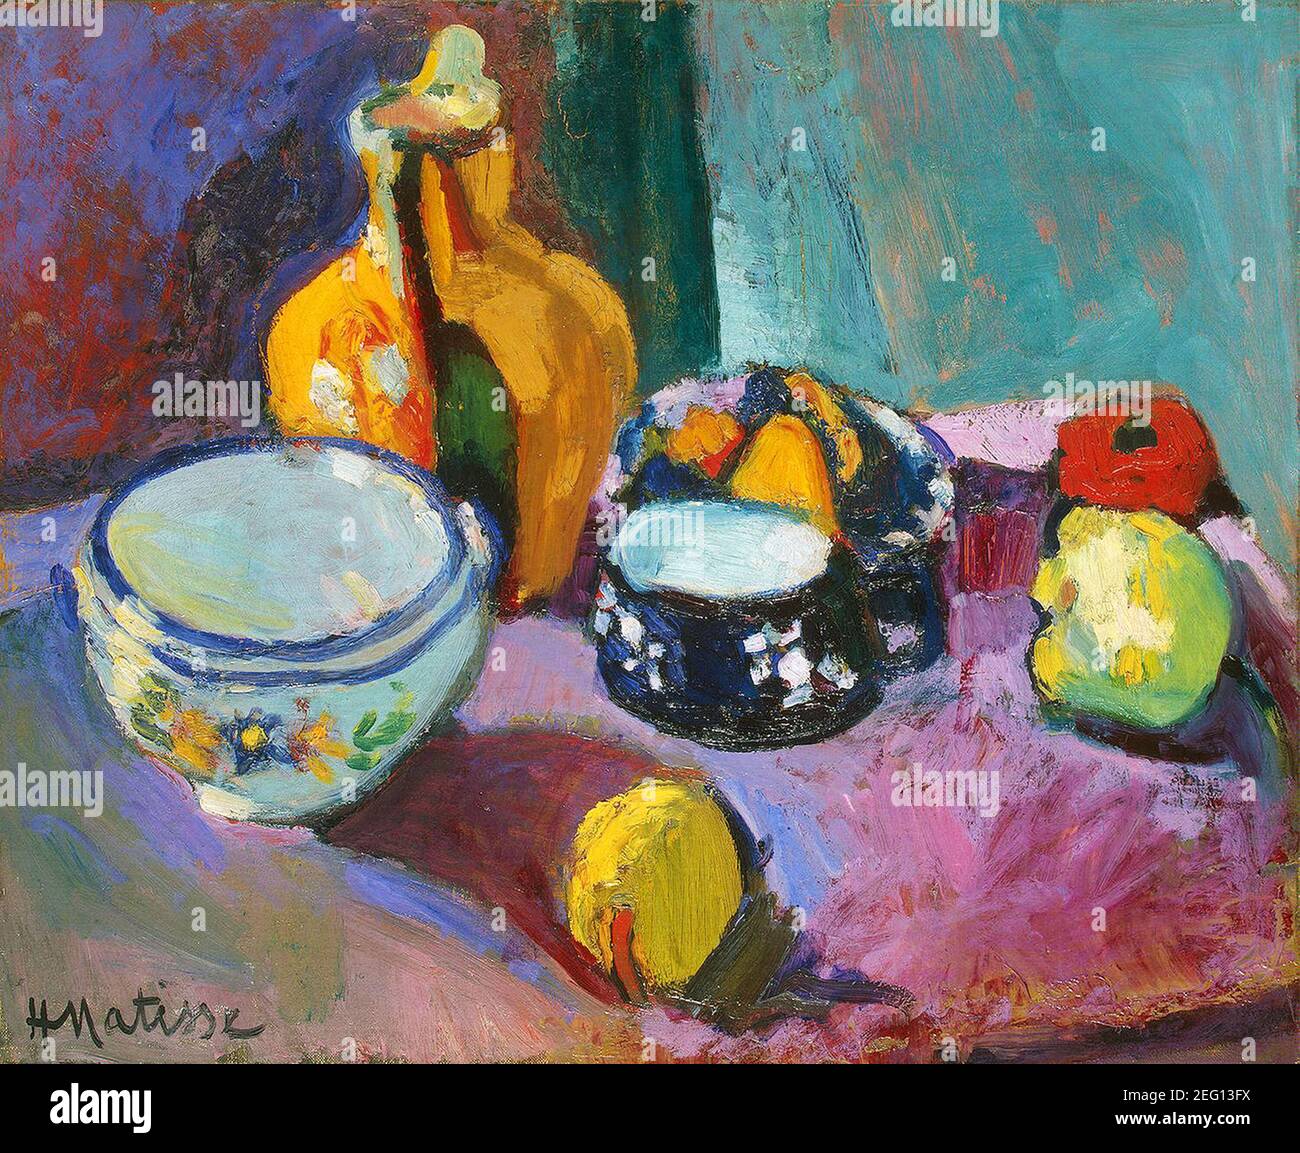 the Dishes And Fruits by Henri Matisse 1901. Hermitage Museum in Saint Petersburg, Russia Stock Photo